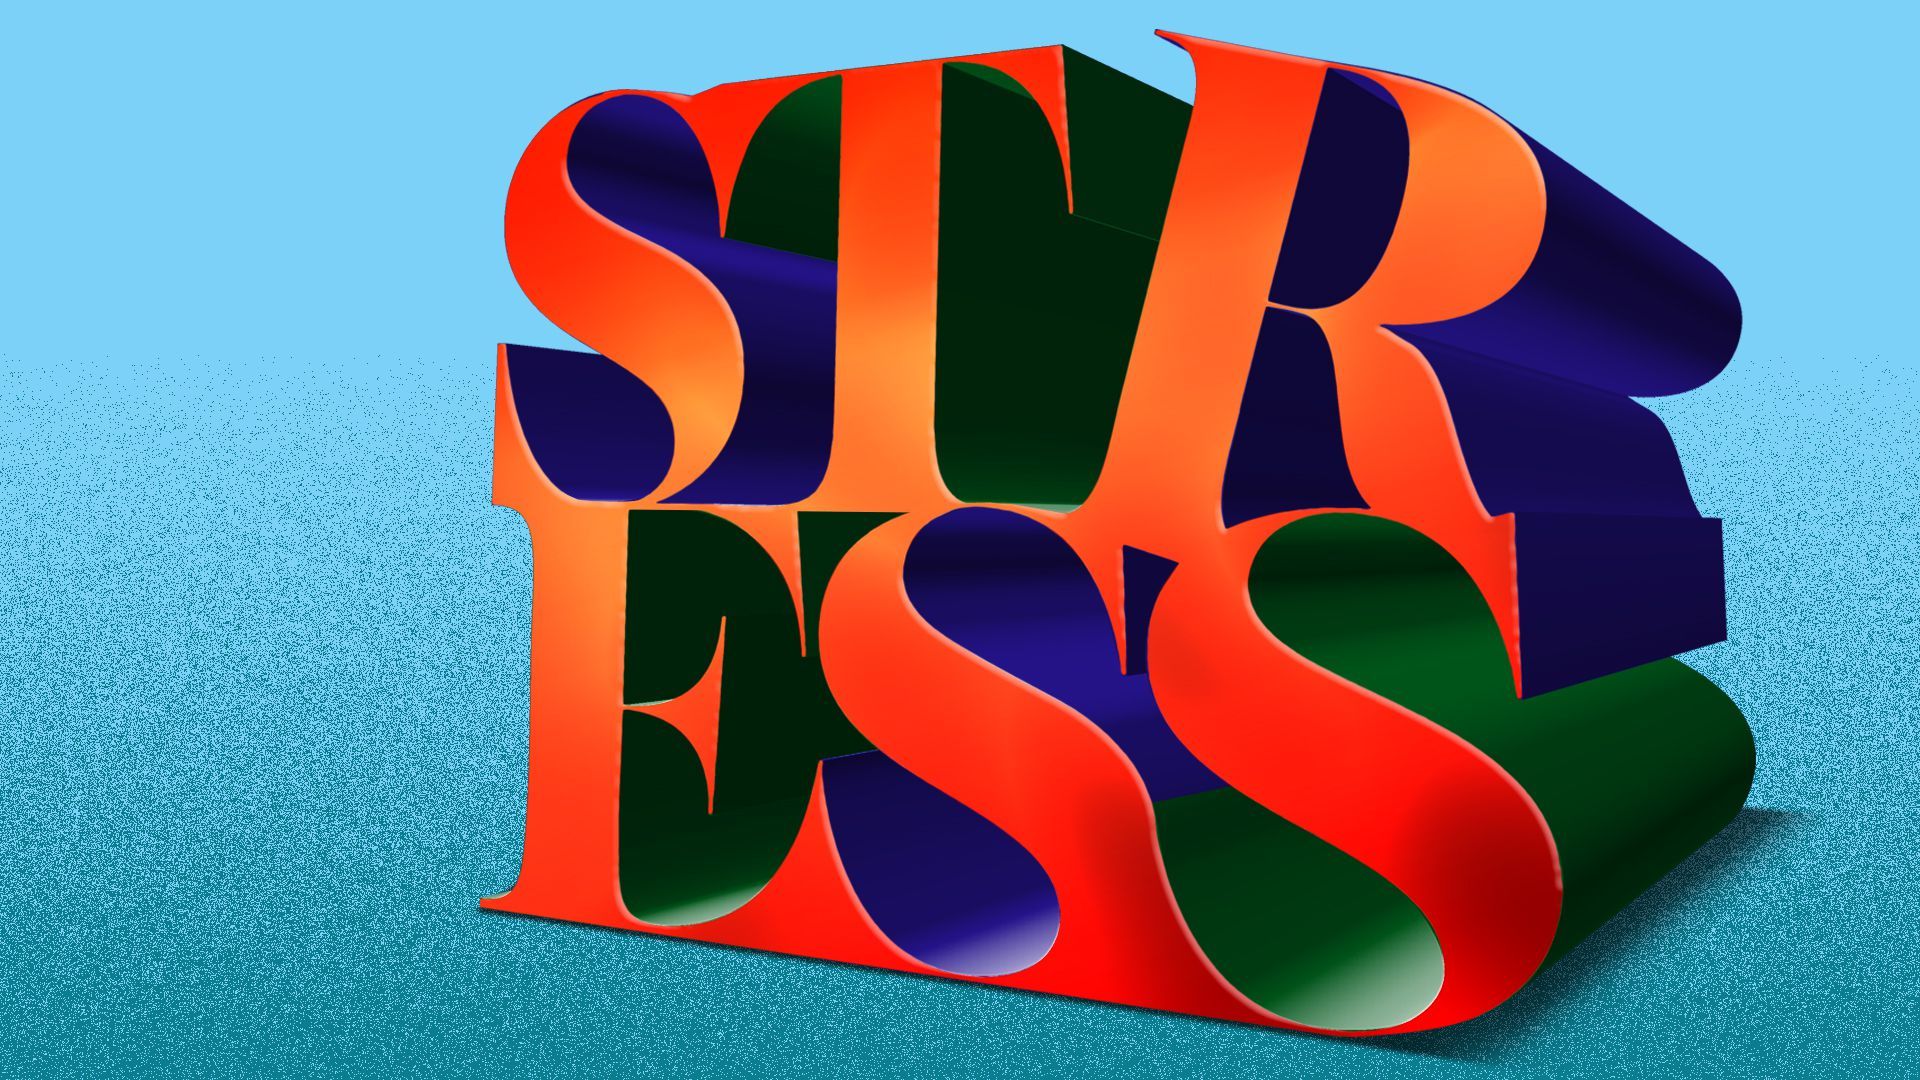 Illustration of the "Love" statue replaced with the word "Stress."